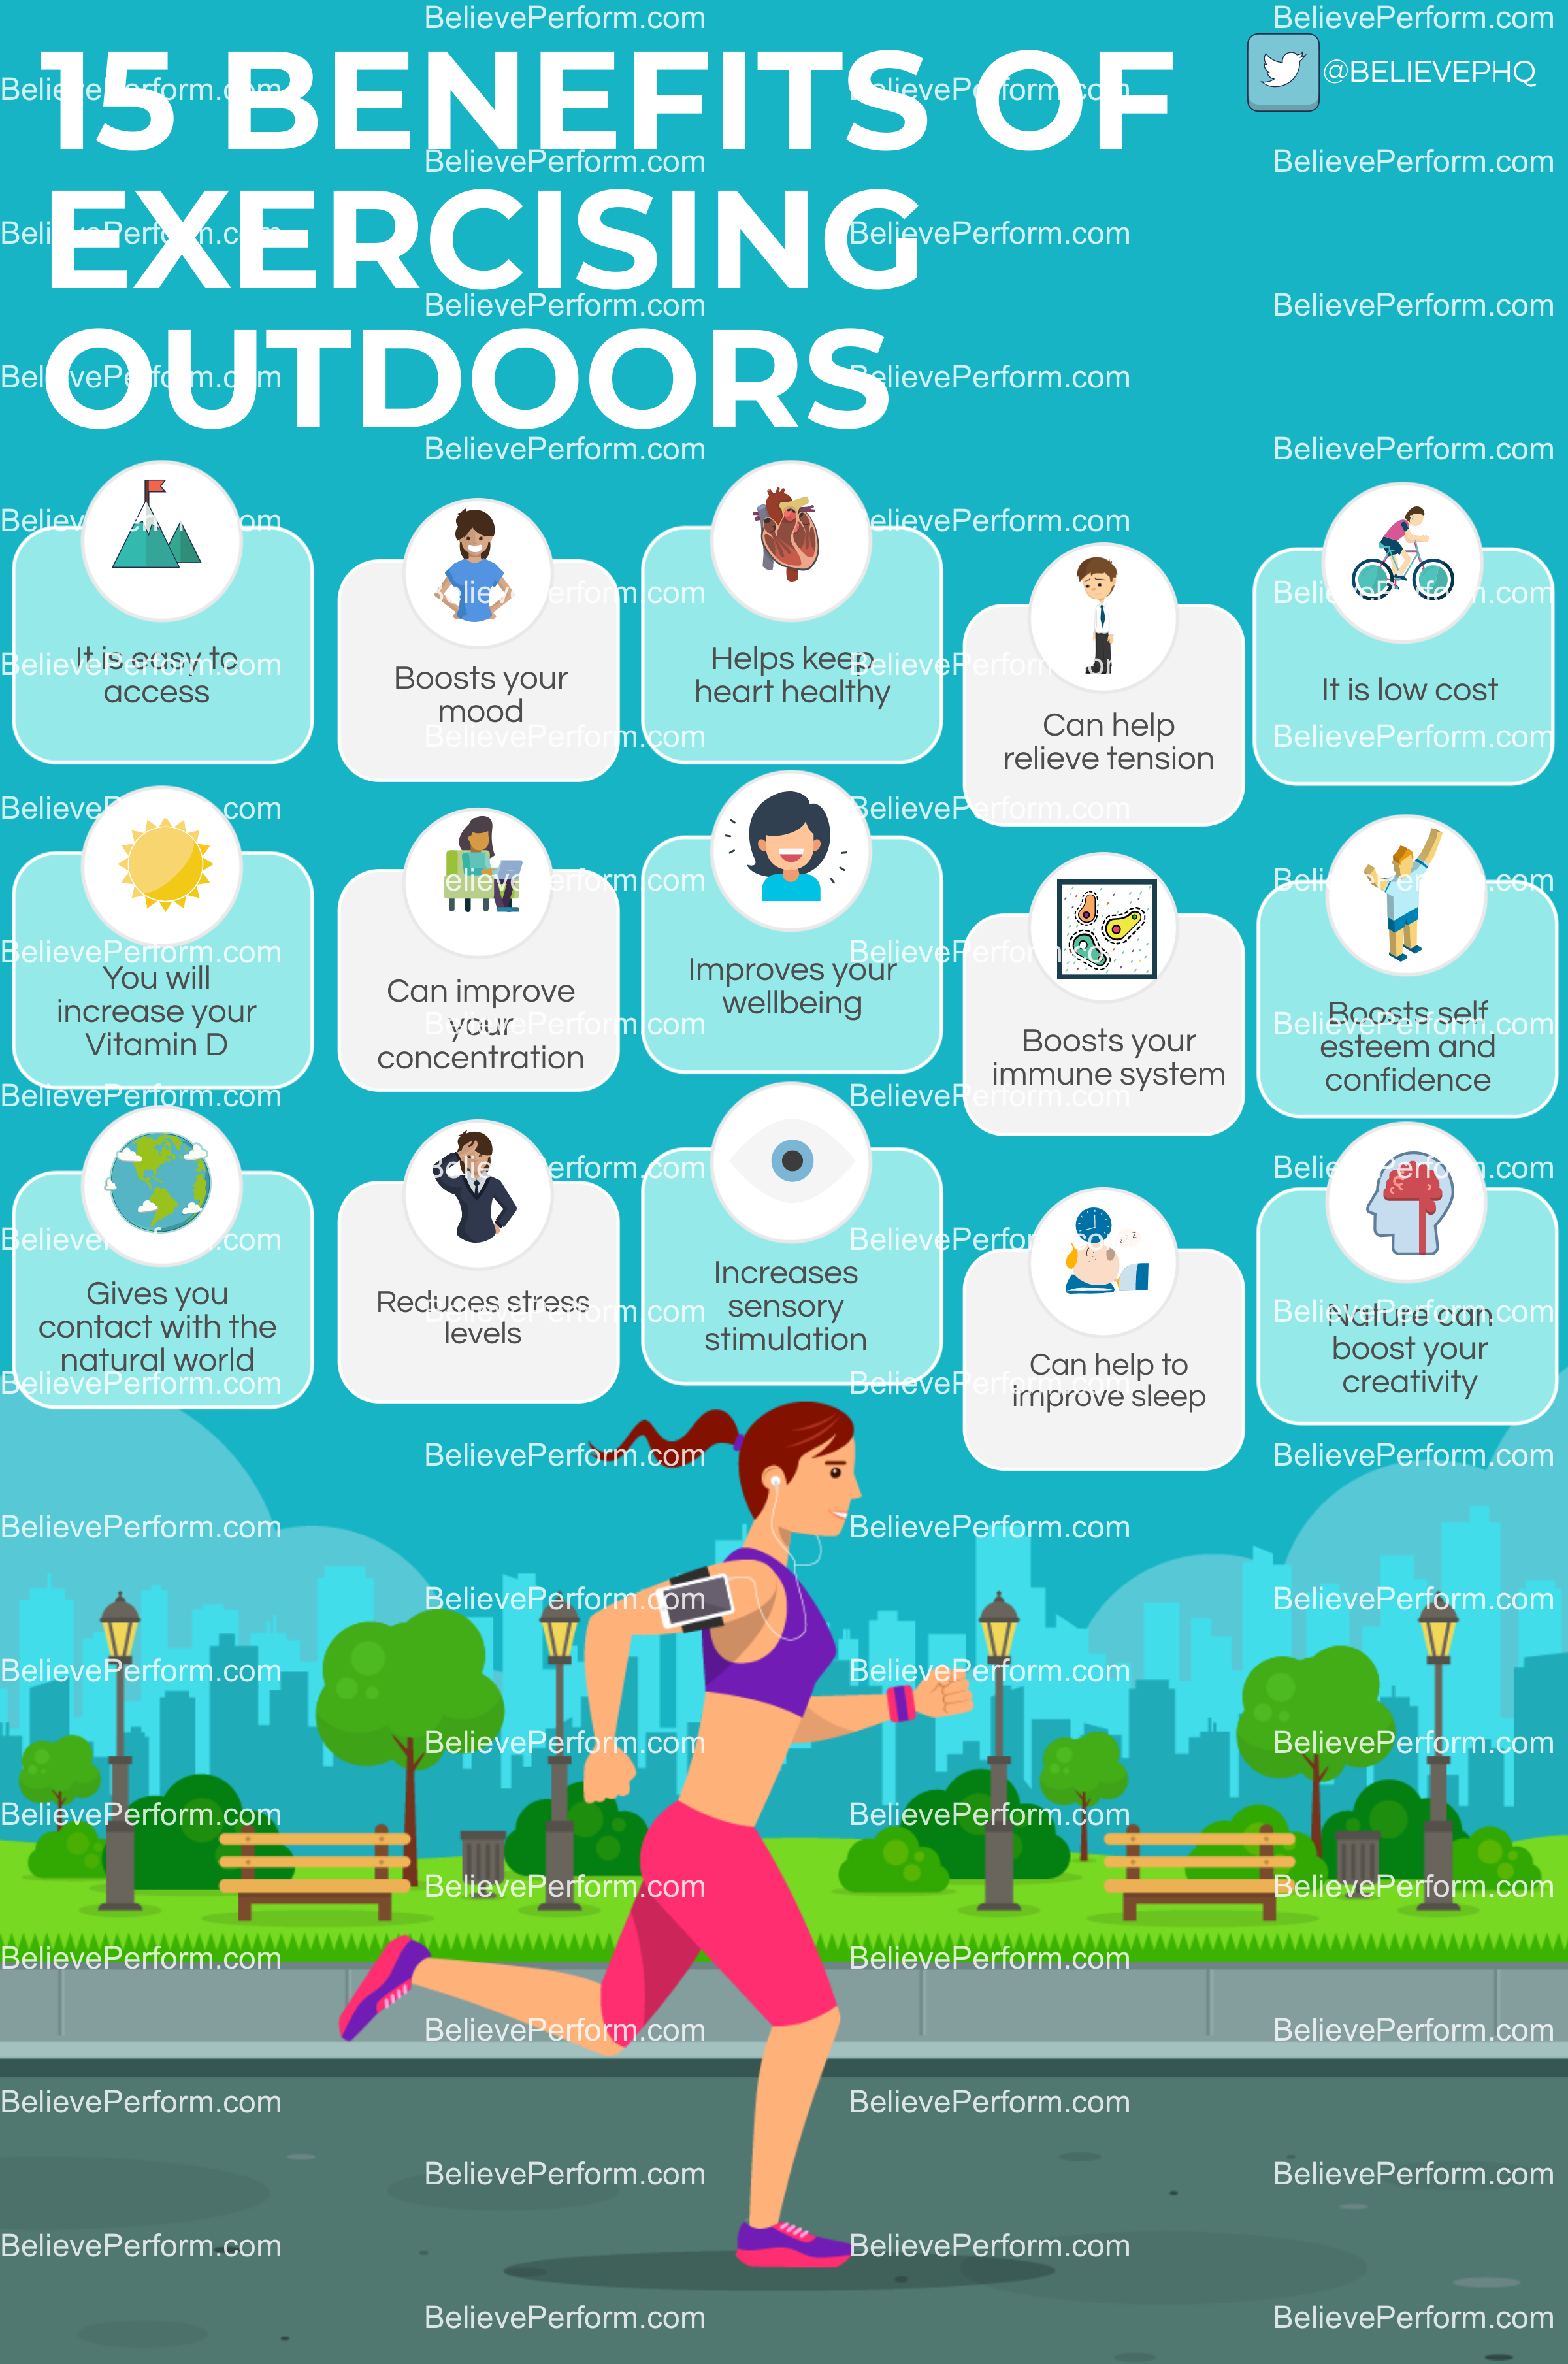 Get Out! 5 Benefits of Outdoor Exercise